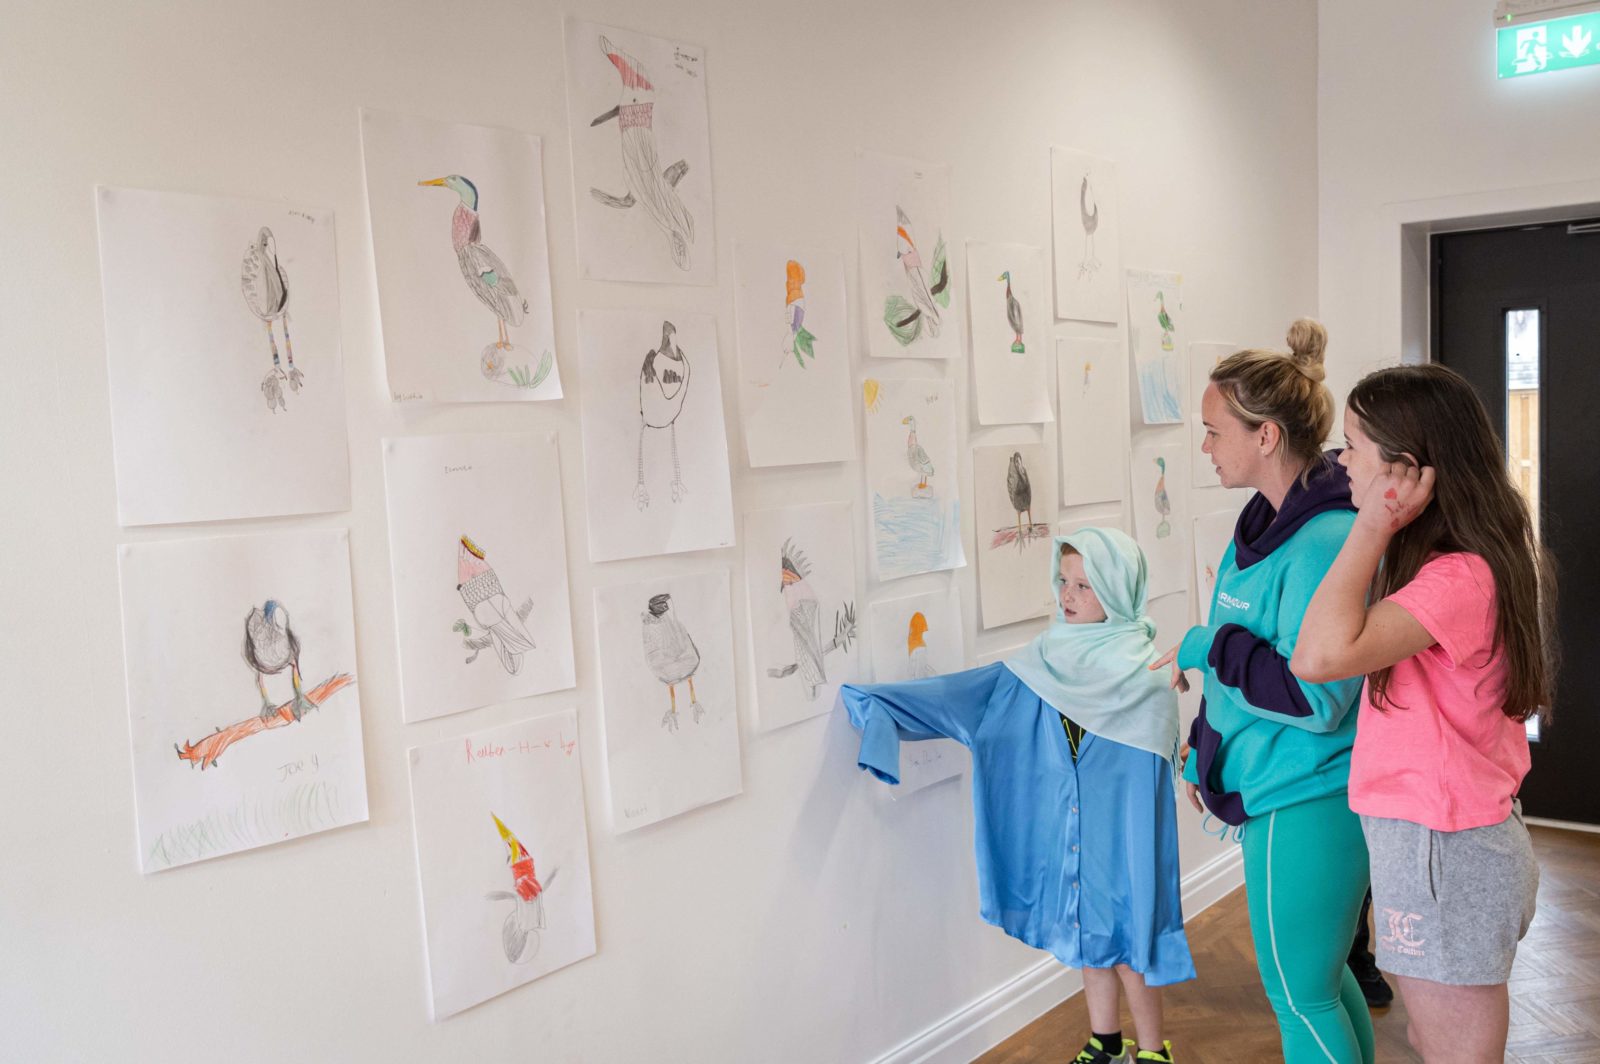 A family is looking at the exhibition of the children's gently referenced bird drawings. The little boy in the photo is pointing at a drawing, wearing an adult's blue shirt that goes down to his knees, and a mint green scarf wrapped around his head and shoulders.